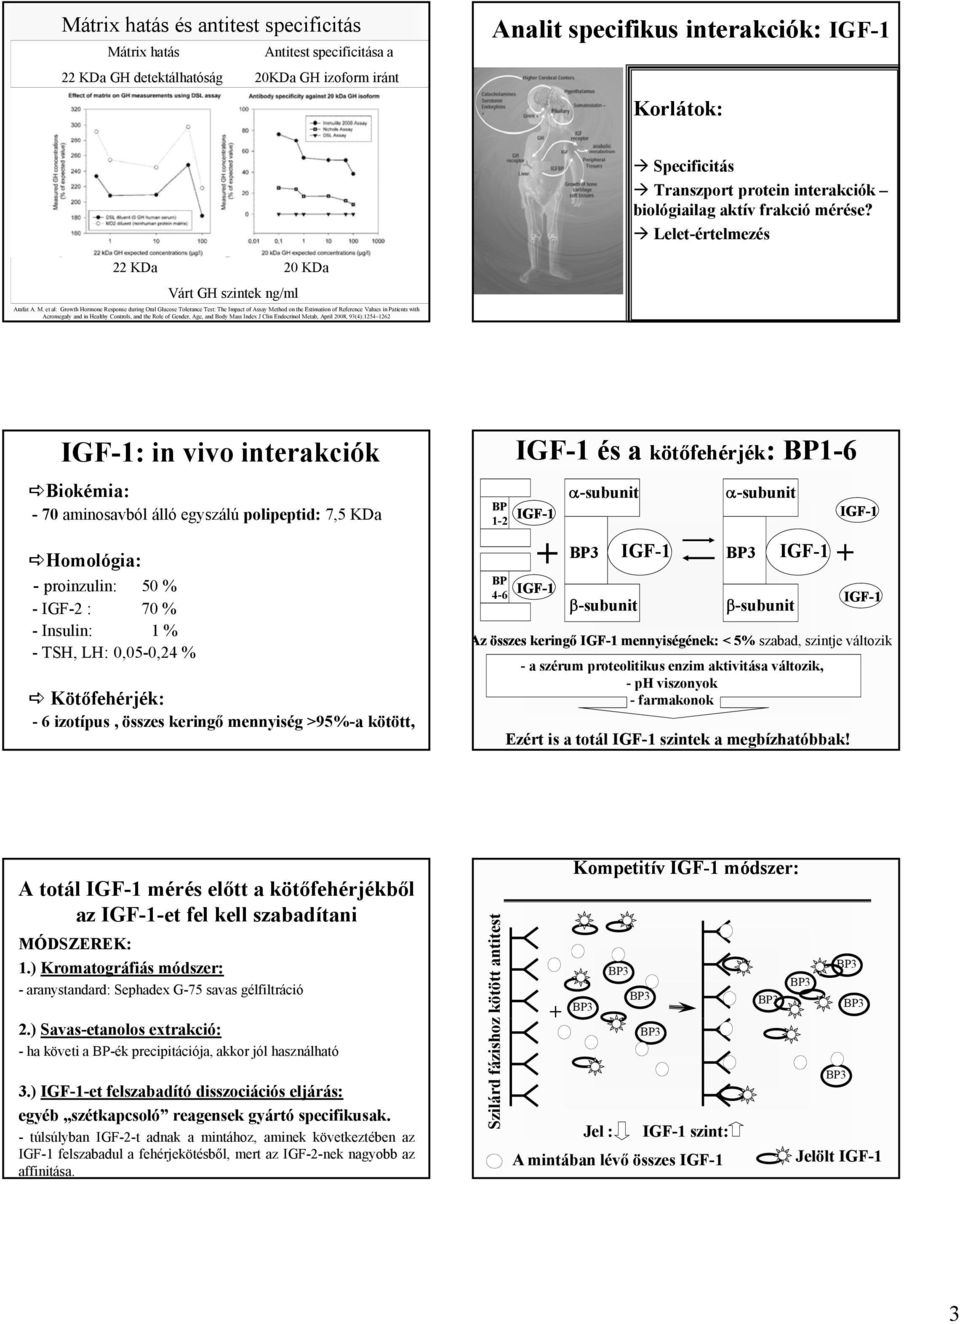 et al: rowth Hormone Response durin Oral lucose Tolerance Test: The mpact of Assay Method on the Estimation of Reference Values in Patients with Acromealy and in Healthy Controls, and the Role of